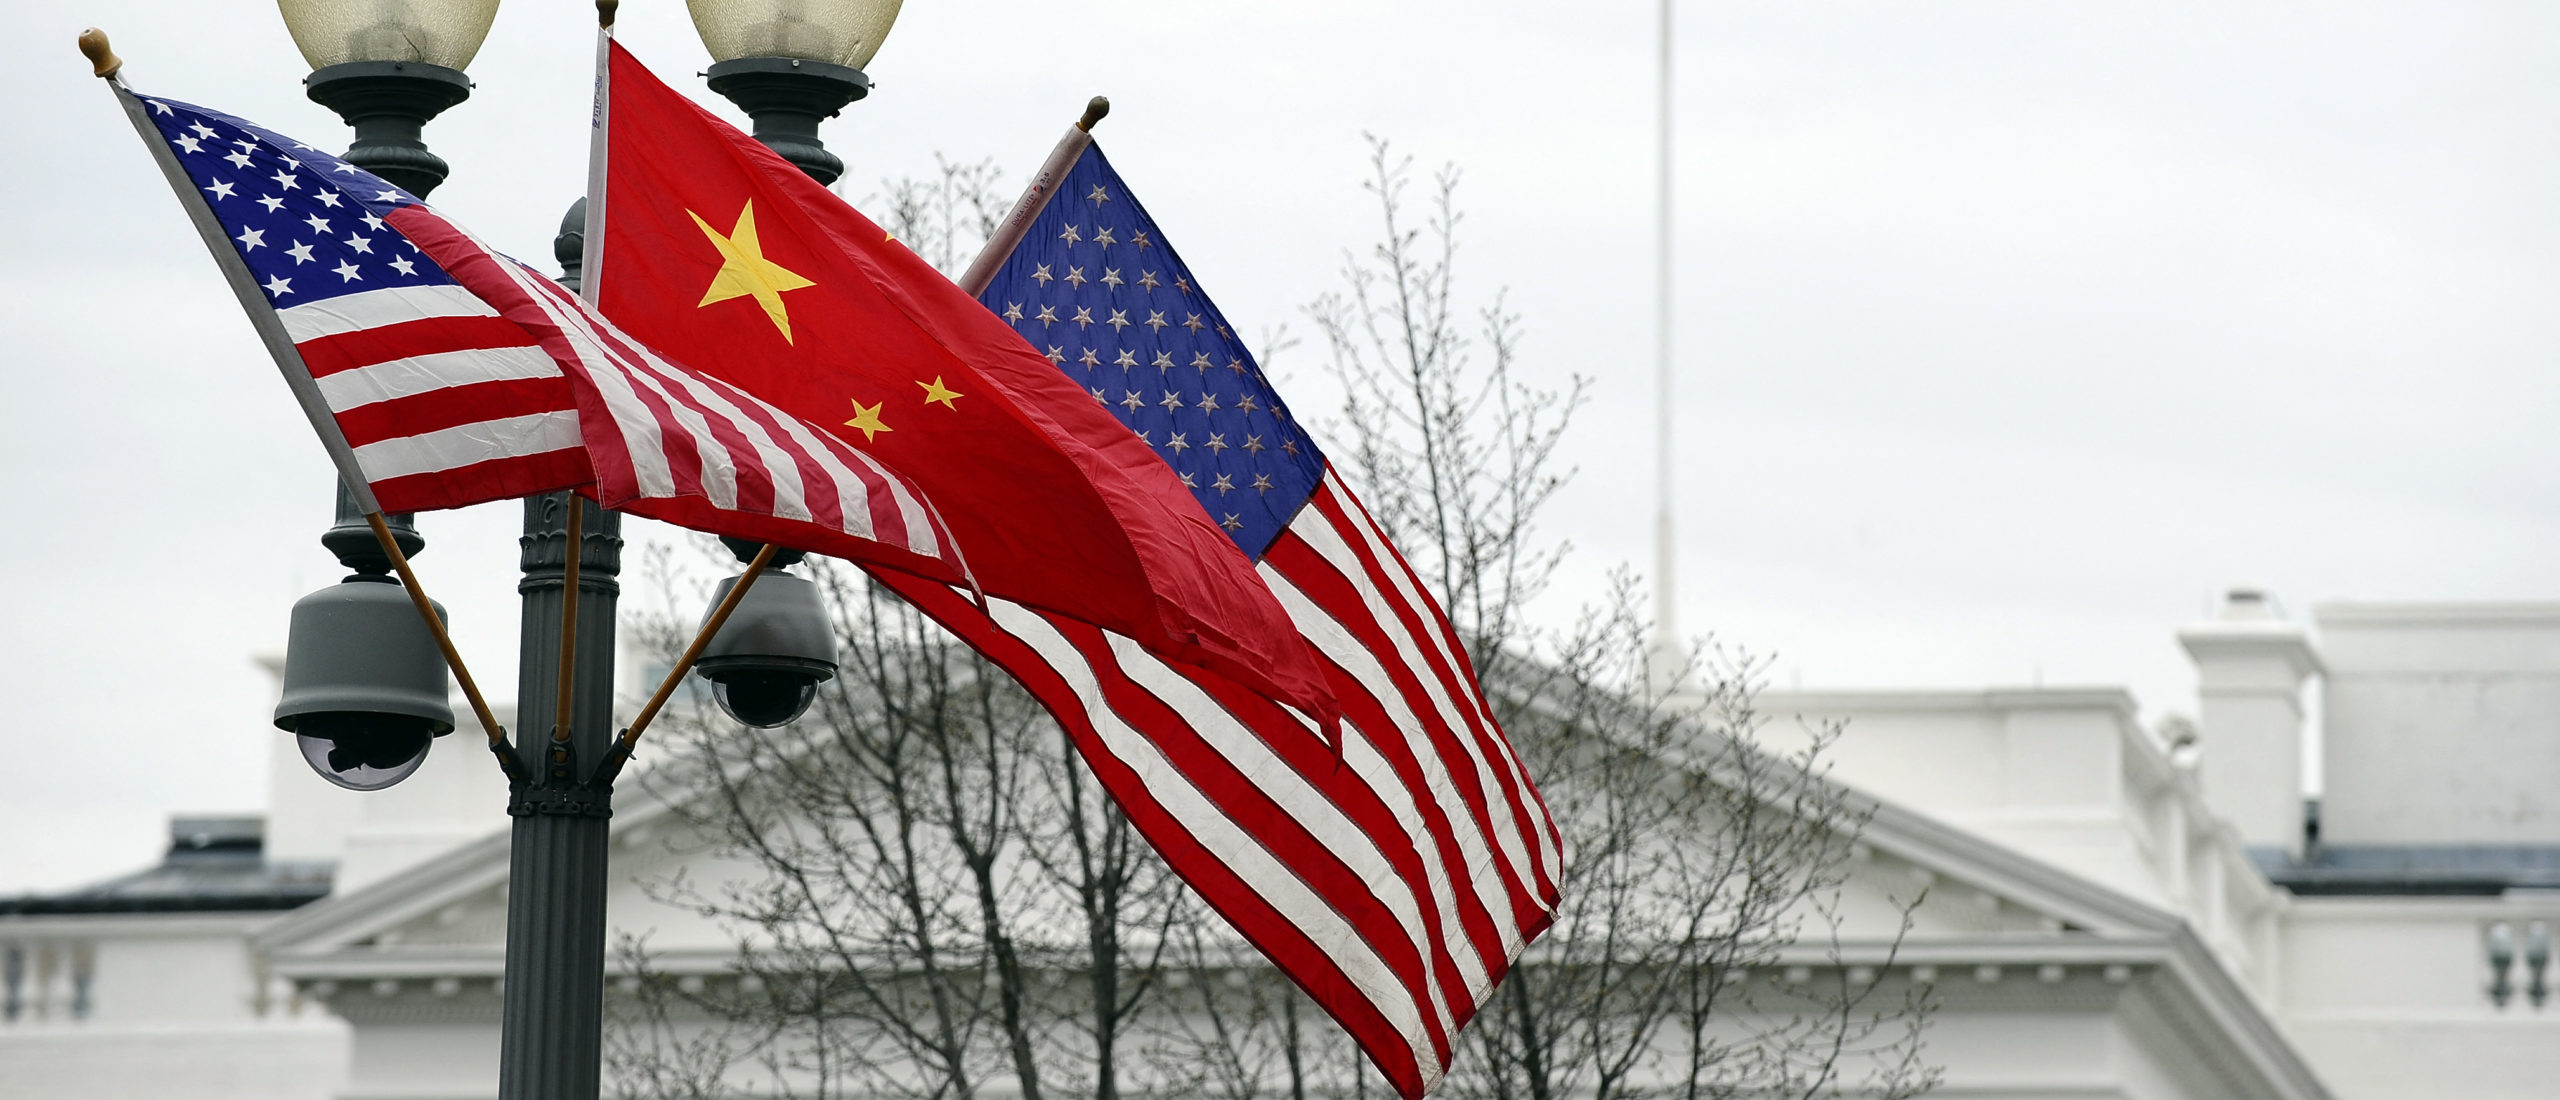 A lamp post is adorned with a Chinese national flag in between two US flags in front of the White House in Washington, DC, on January 17, 2011 previous to Chinese President Hu Jintao's state visit. Ahead of a legacy-building state visit to the US, Chinese President Hu Jintao called for "common ground" while acknowledging that "sensitive issues" needed to be addressed. AFP PHOTO/Jewel Samad (Photo by Jewel SAMAD / AFP) (Photo by JEWEL SAMAD/AFP via Getty Images)